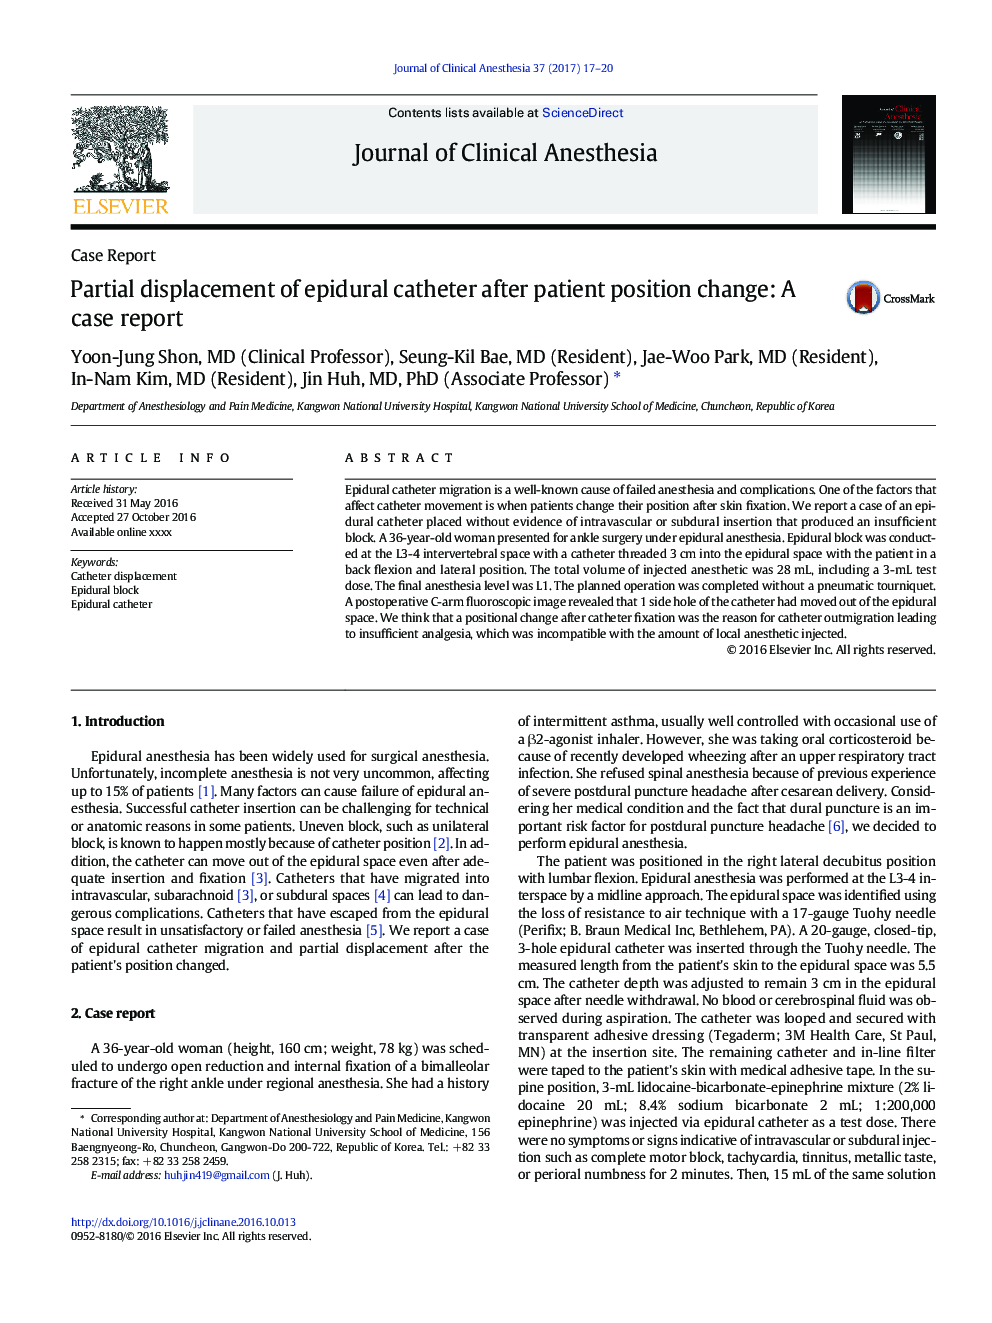 Partial displacement of epidural catheter after patient position change: A case report